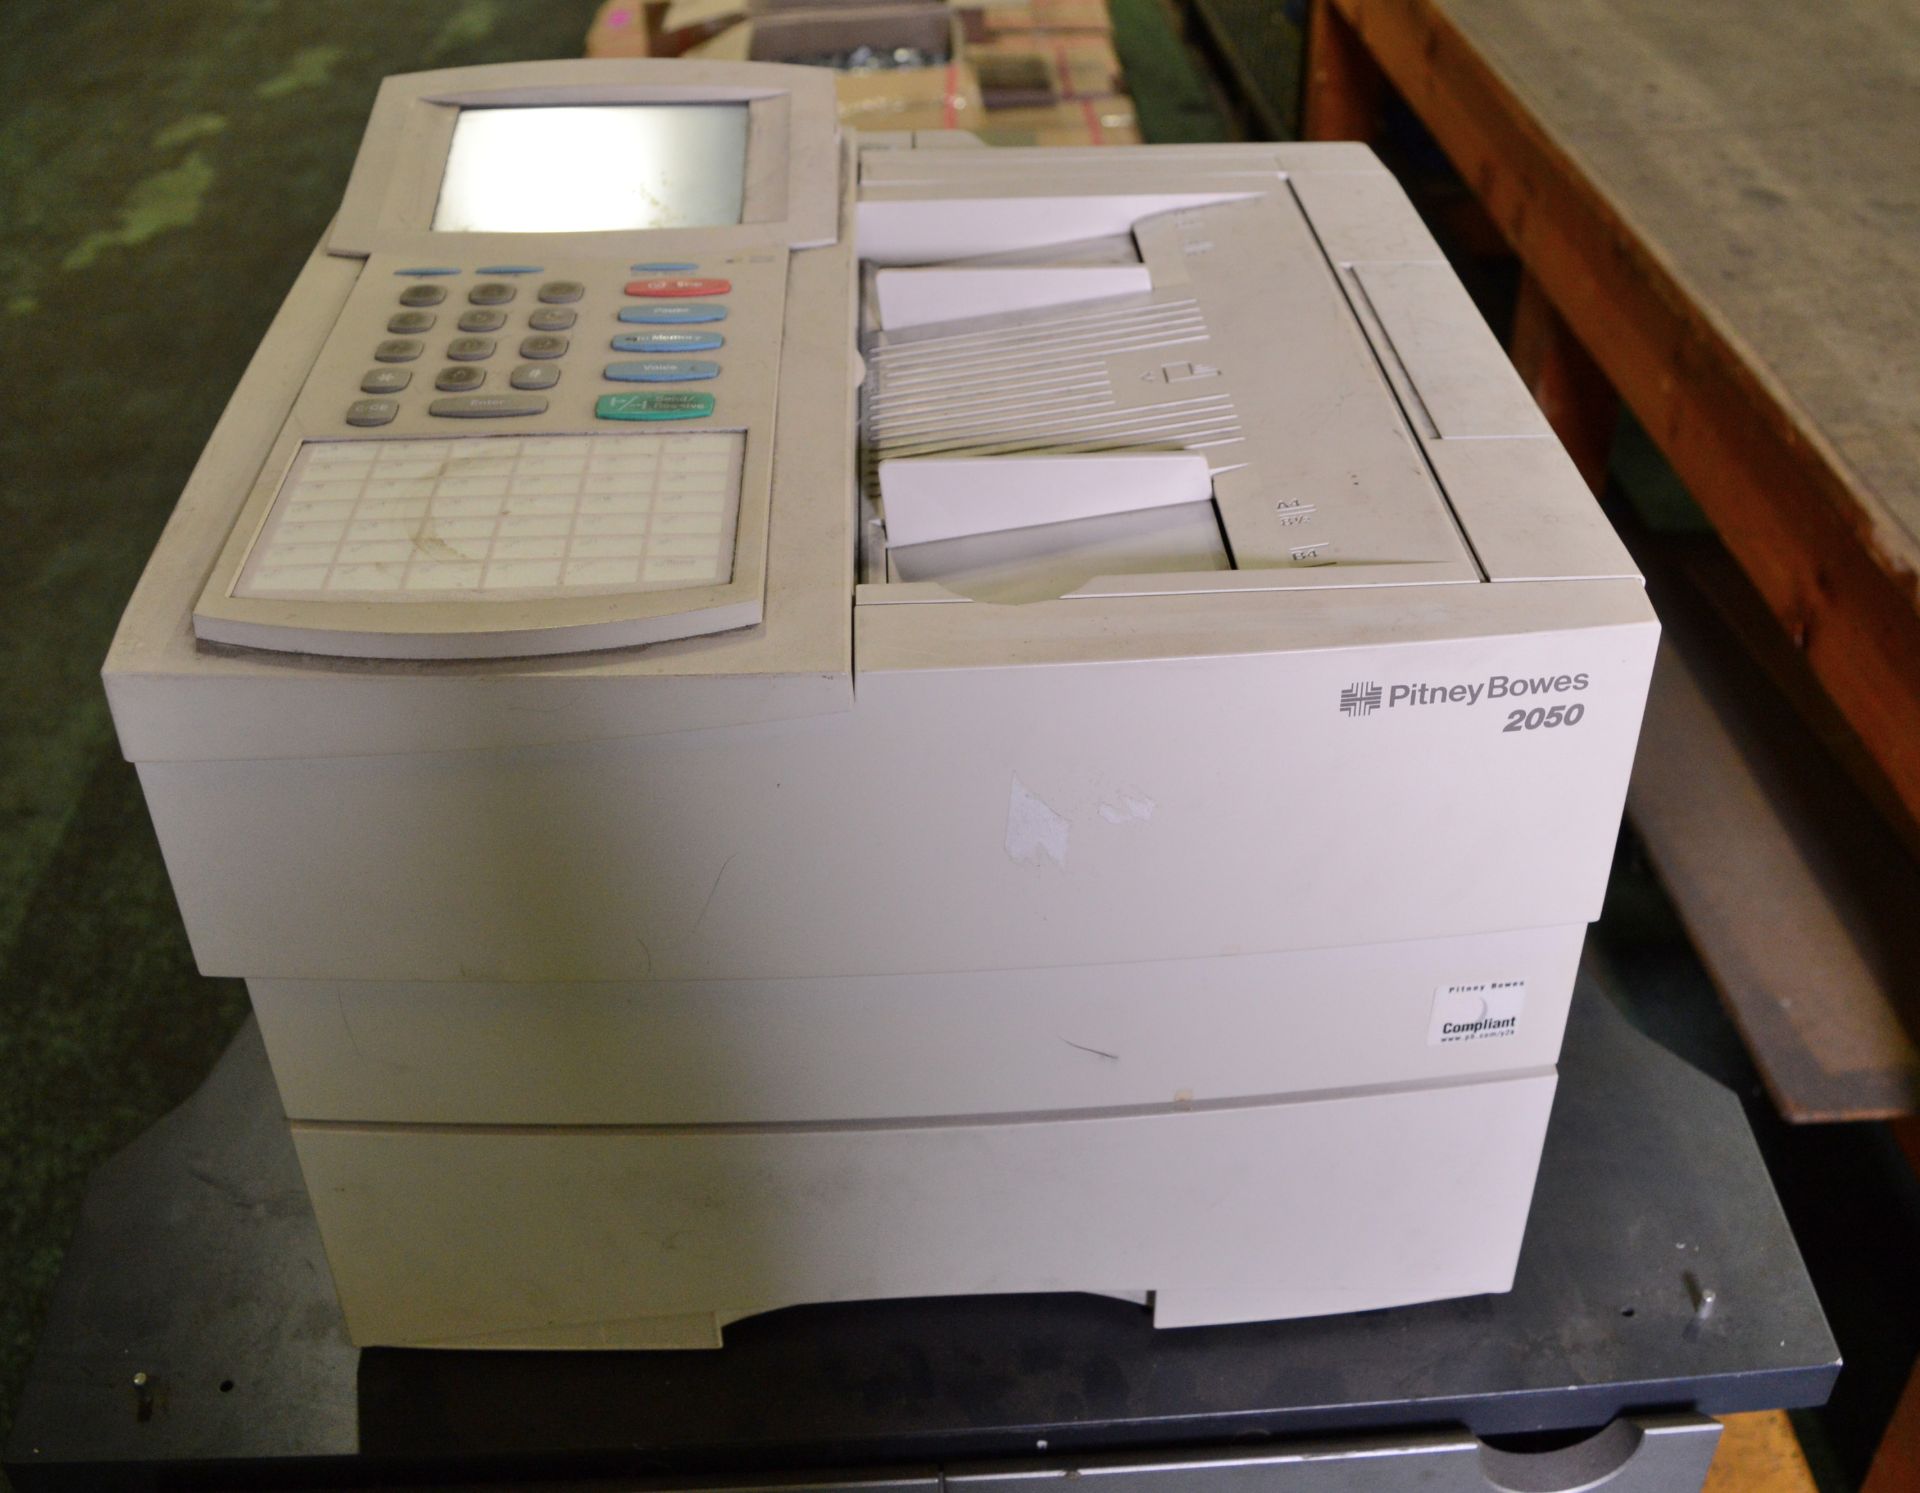 Pitney Bowes 2050 Printer on Stand. - Image 2 of 4